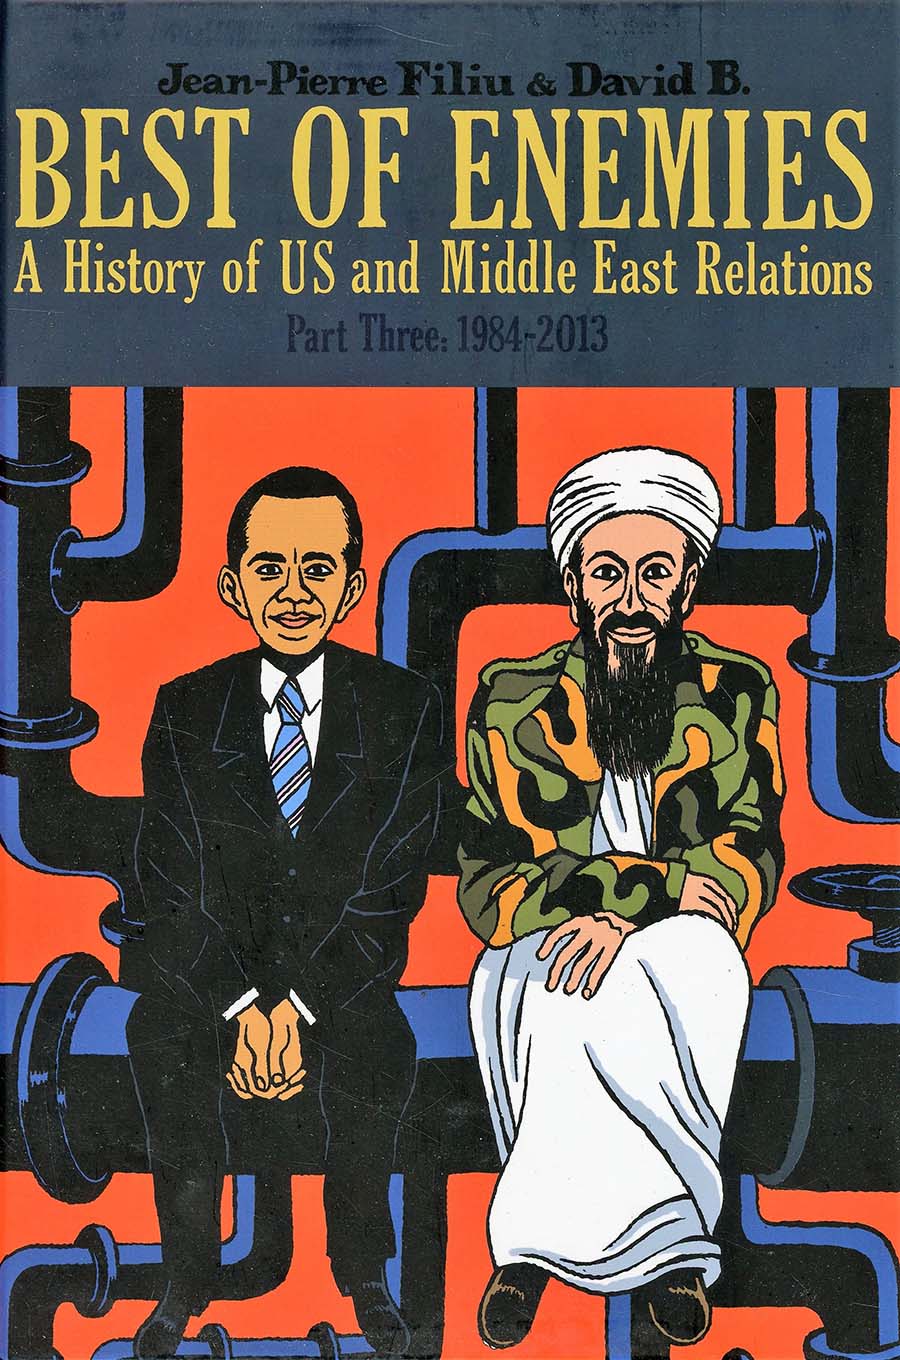 Best Of Enemies A History Of US And Middle East Relations Part 3 1984-2013 HC